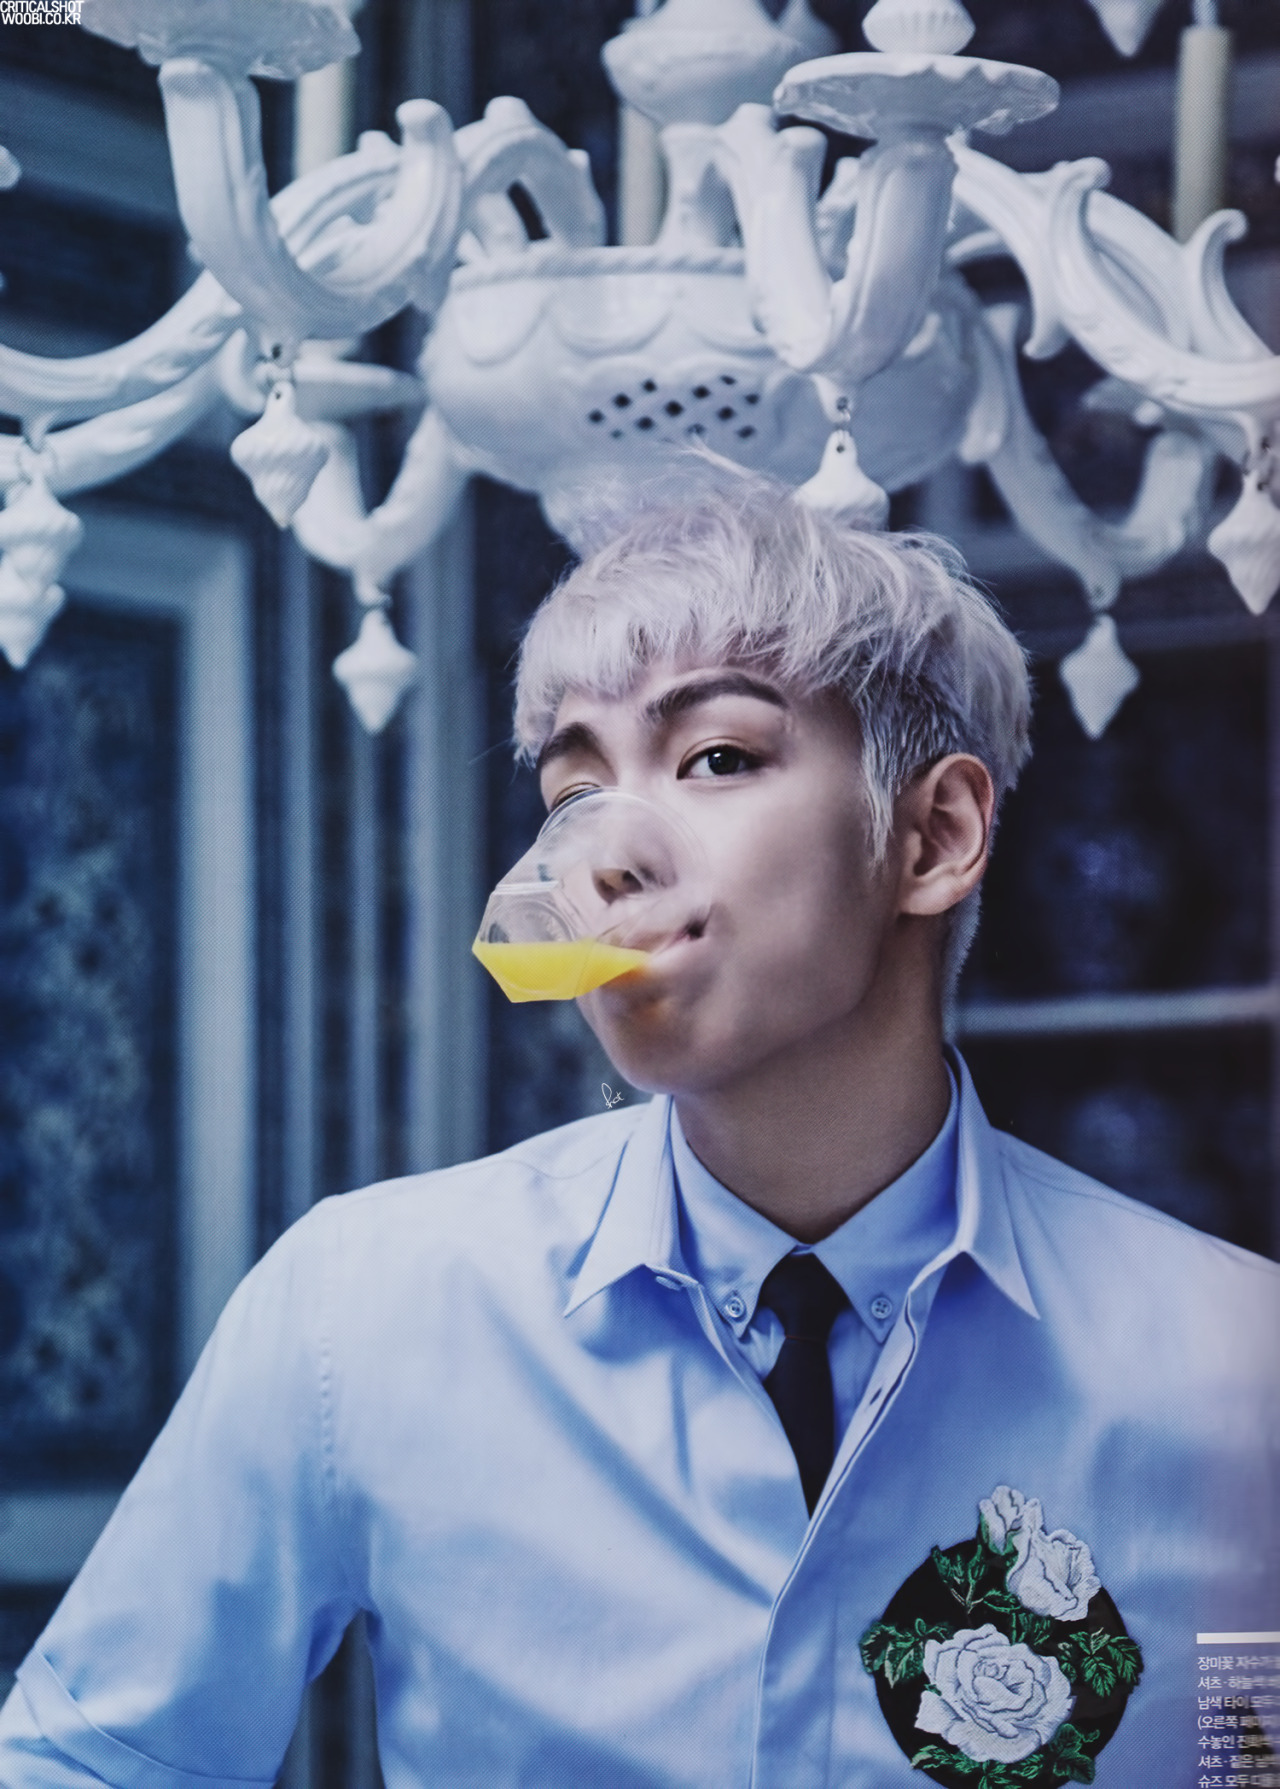 TOP Arena Homme March 2016 scans by CriticalShot (8).png